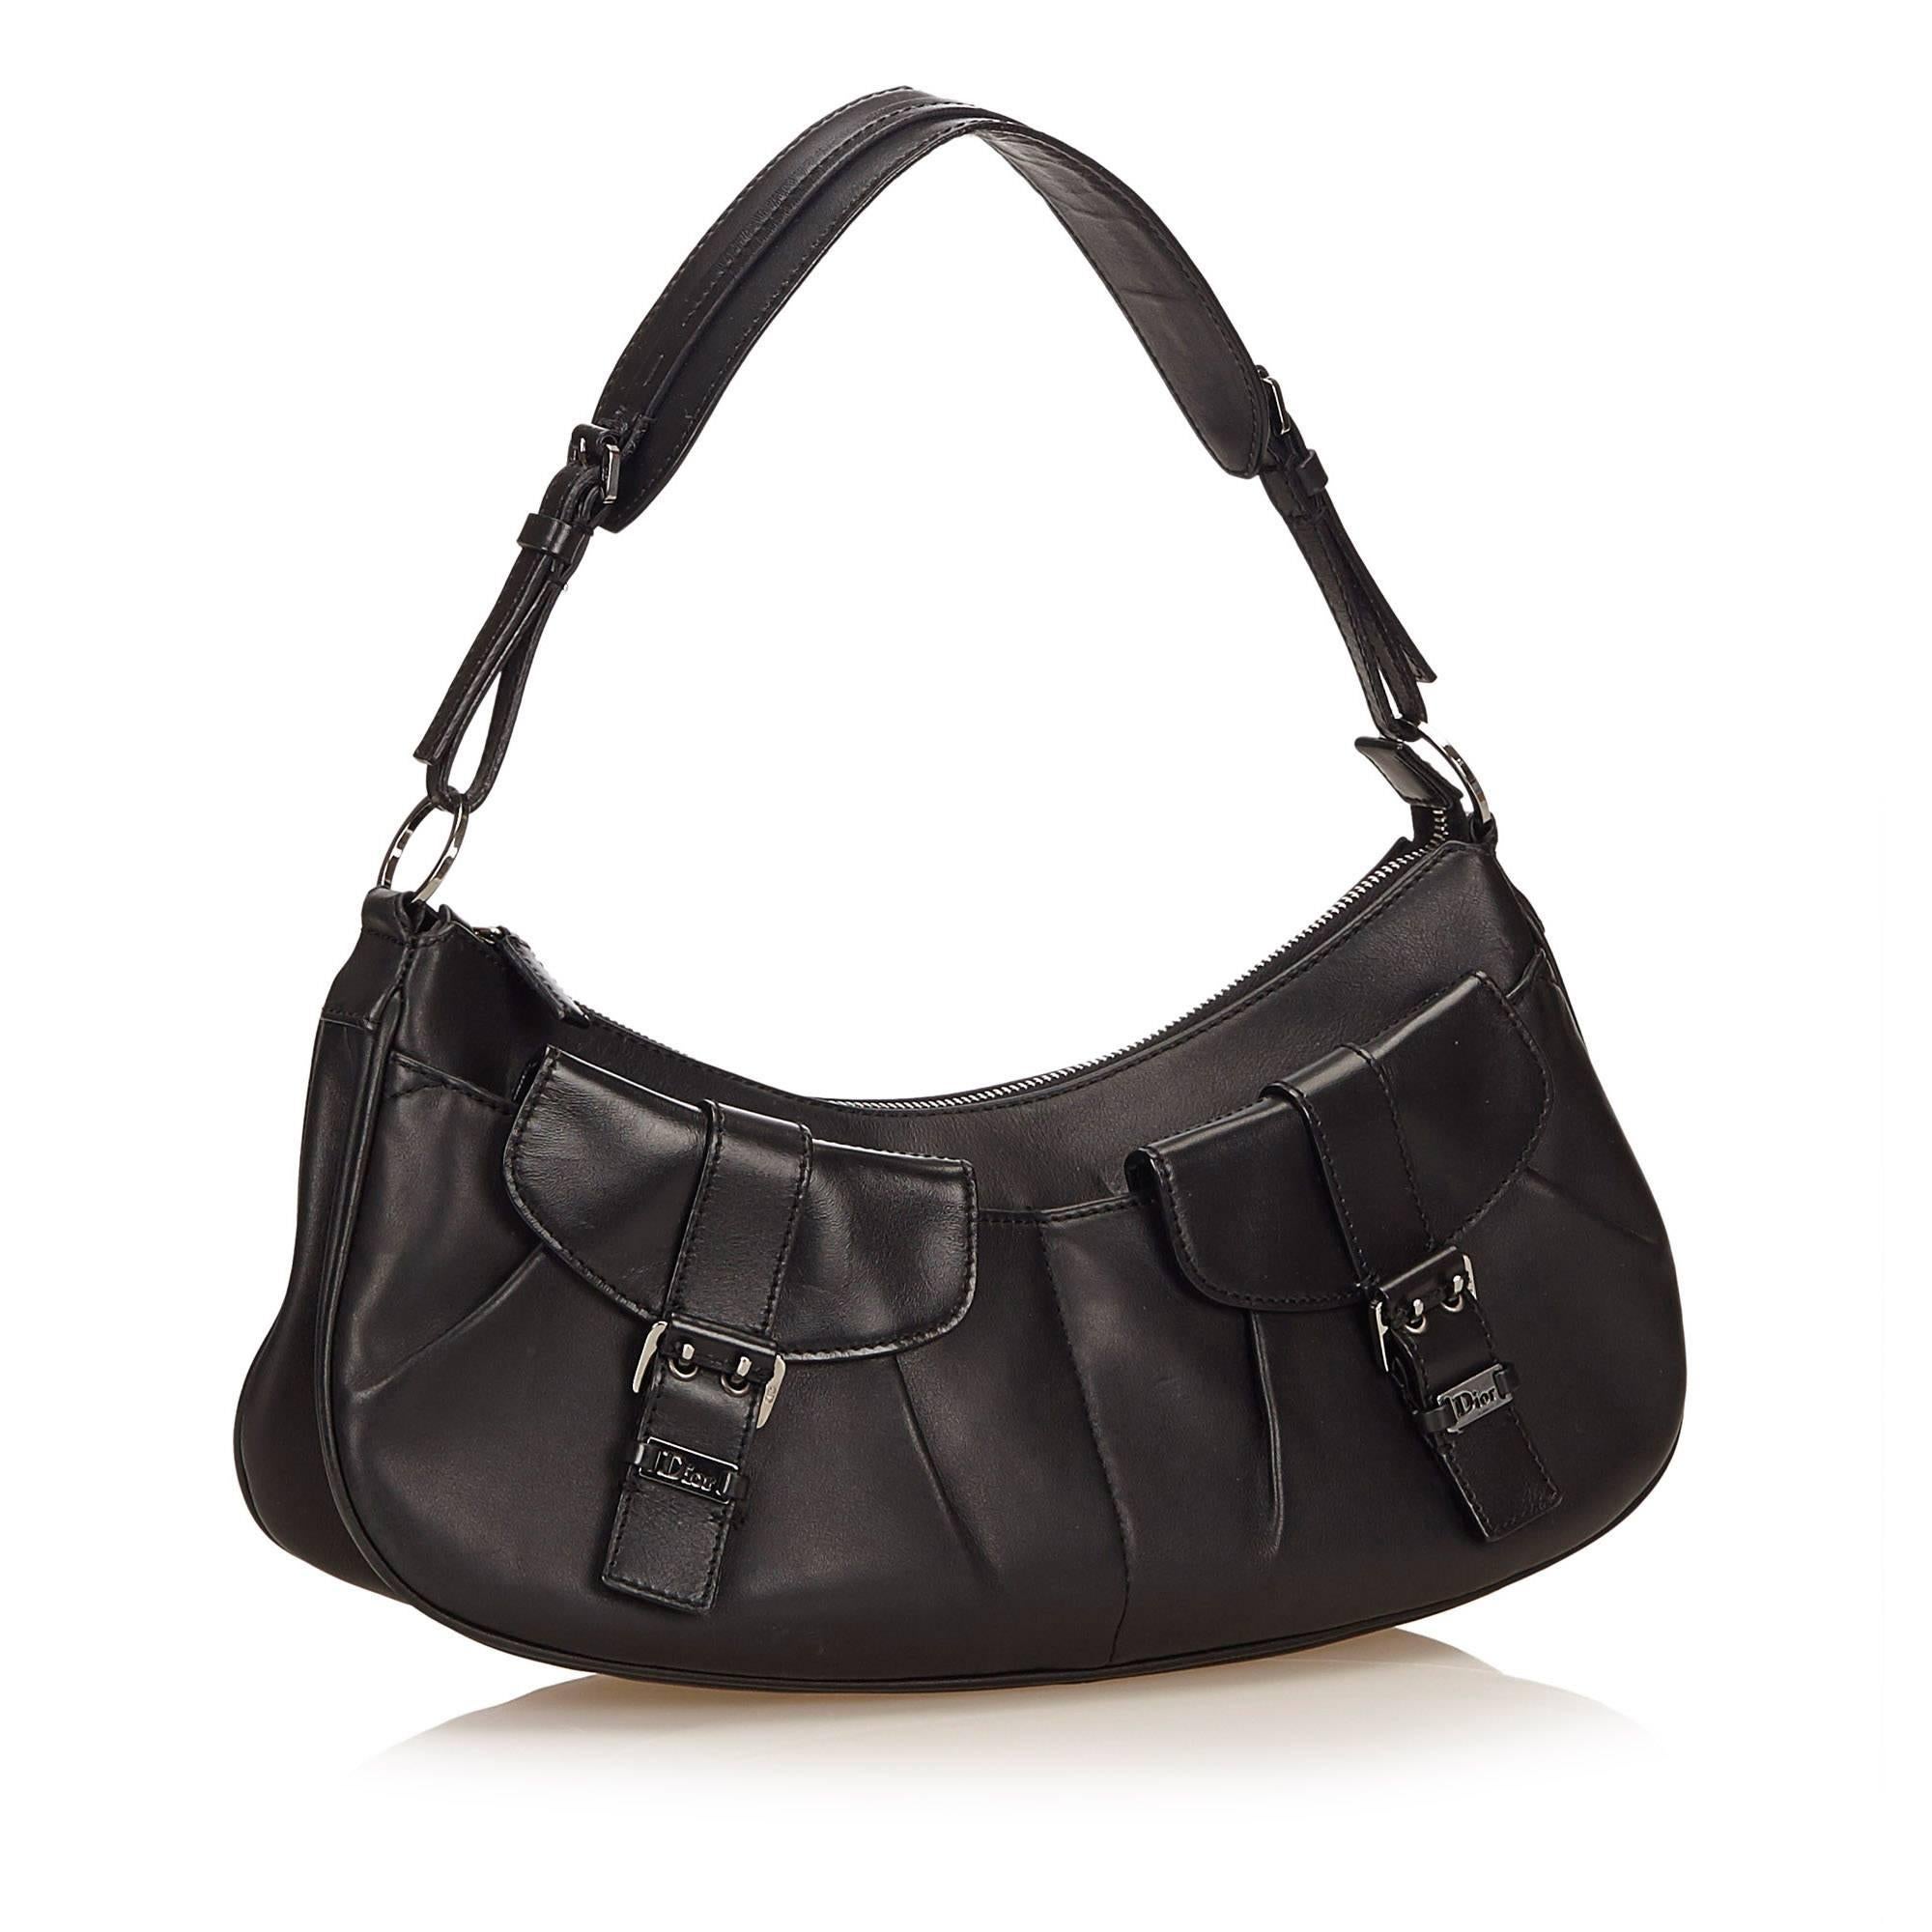 This shoulder bag features a leather body, flat strap, top zip closure, and interior zip pocket. 

It carries a B condition rating.

Dimensions: 
Length 35 cm
Width 15 cm
Depth 9 cm
Shoulder Drop 22 cm 

Inclusions: No longer comes with original